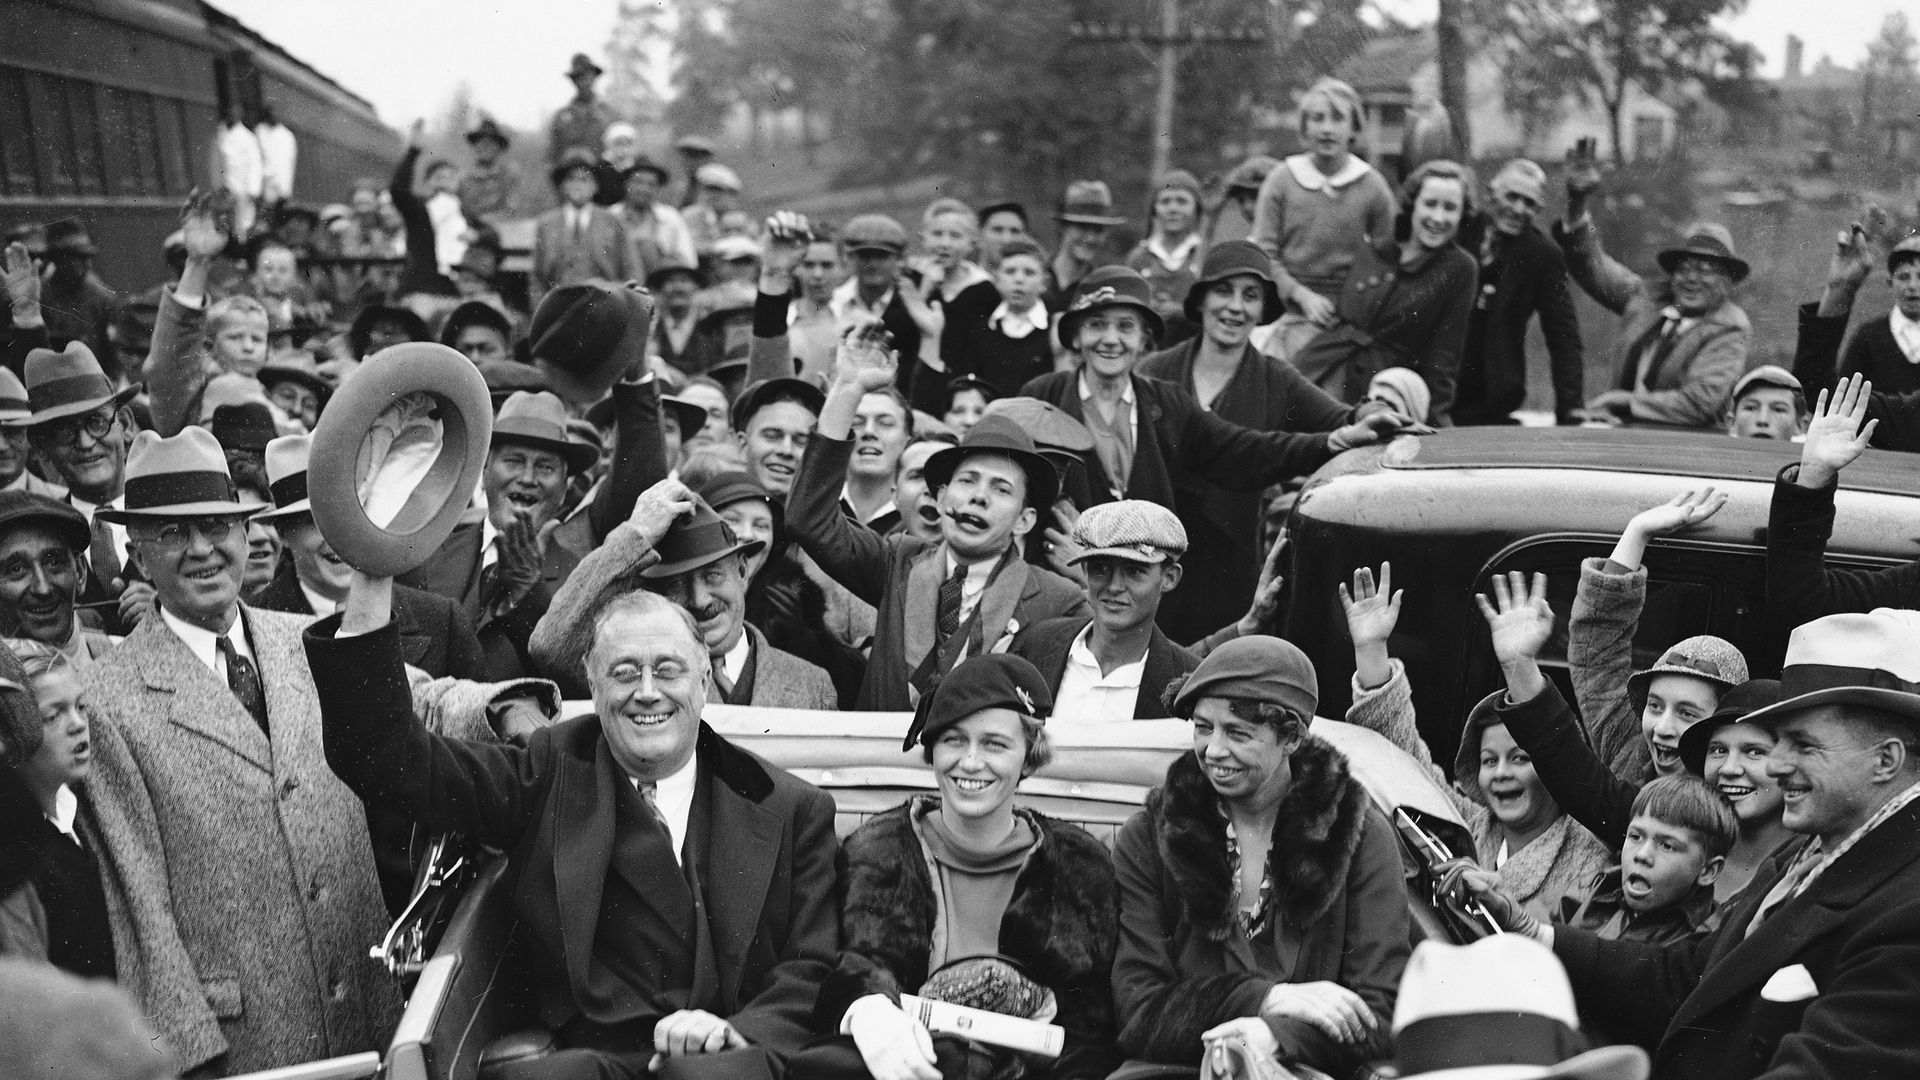 FDR waves to a crowd in a car